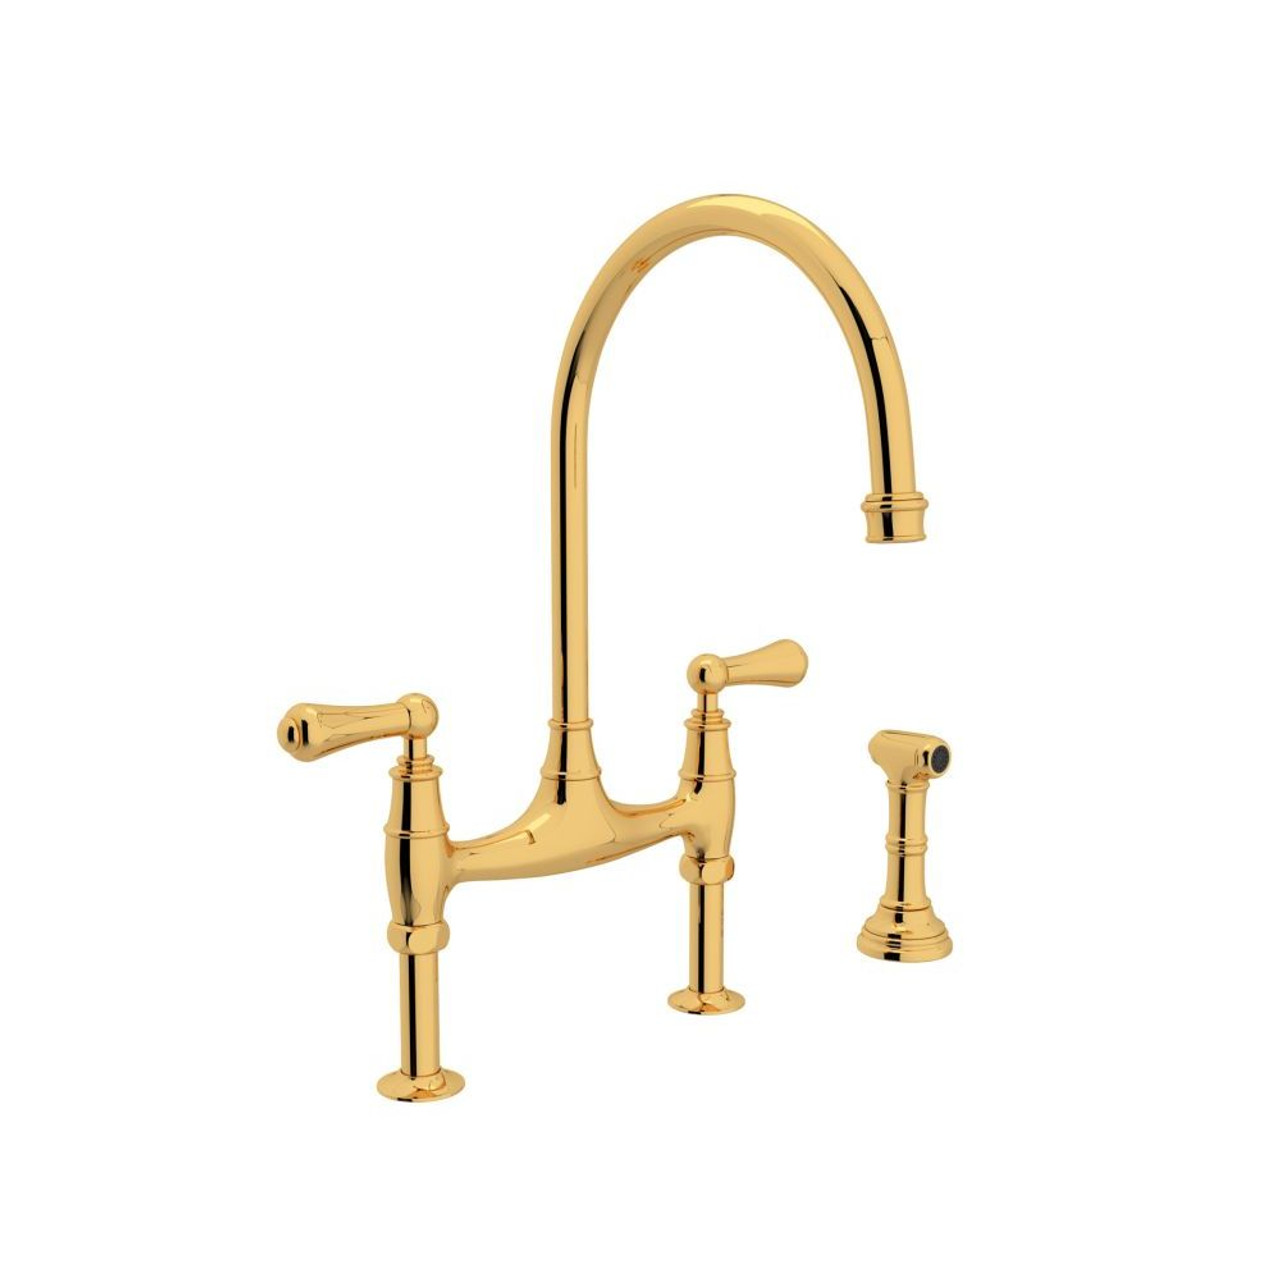 Rohl Perrin And Rowe Bridge Kitchen Faucet In English Gold U4719l